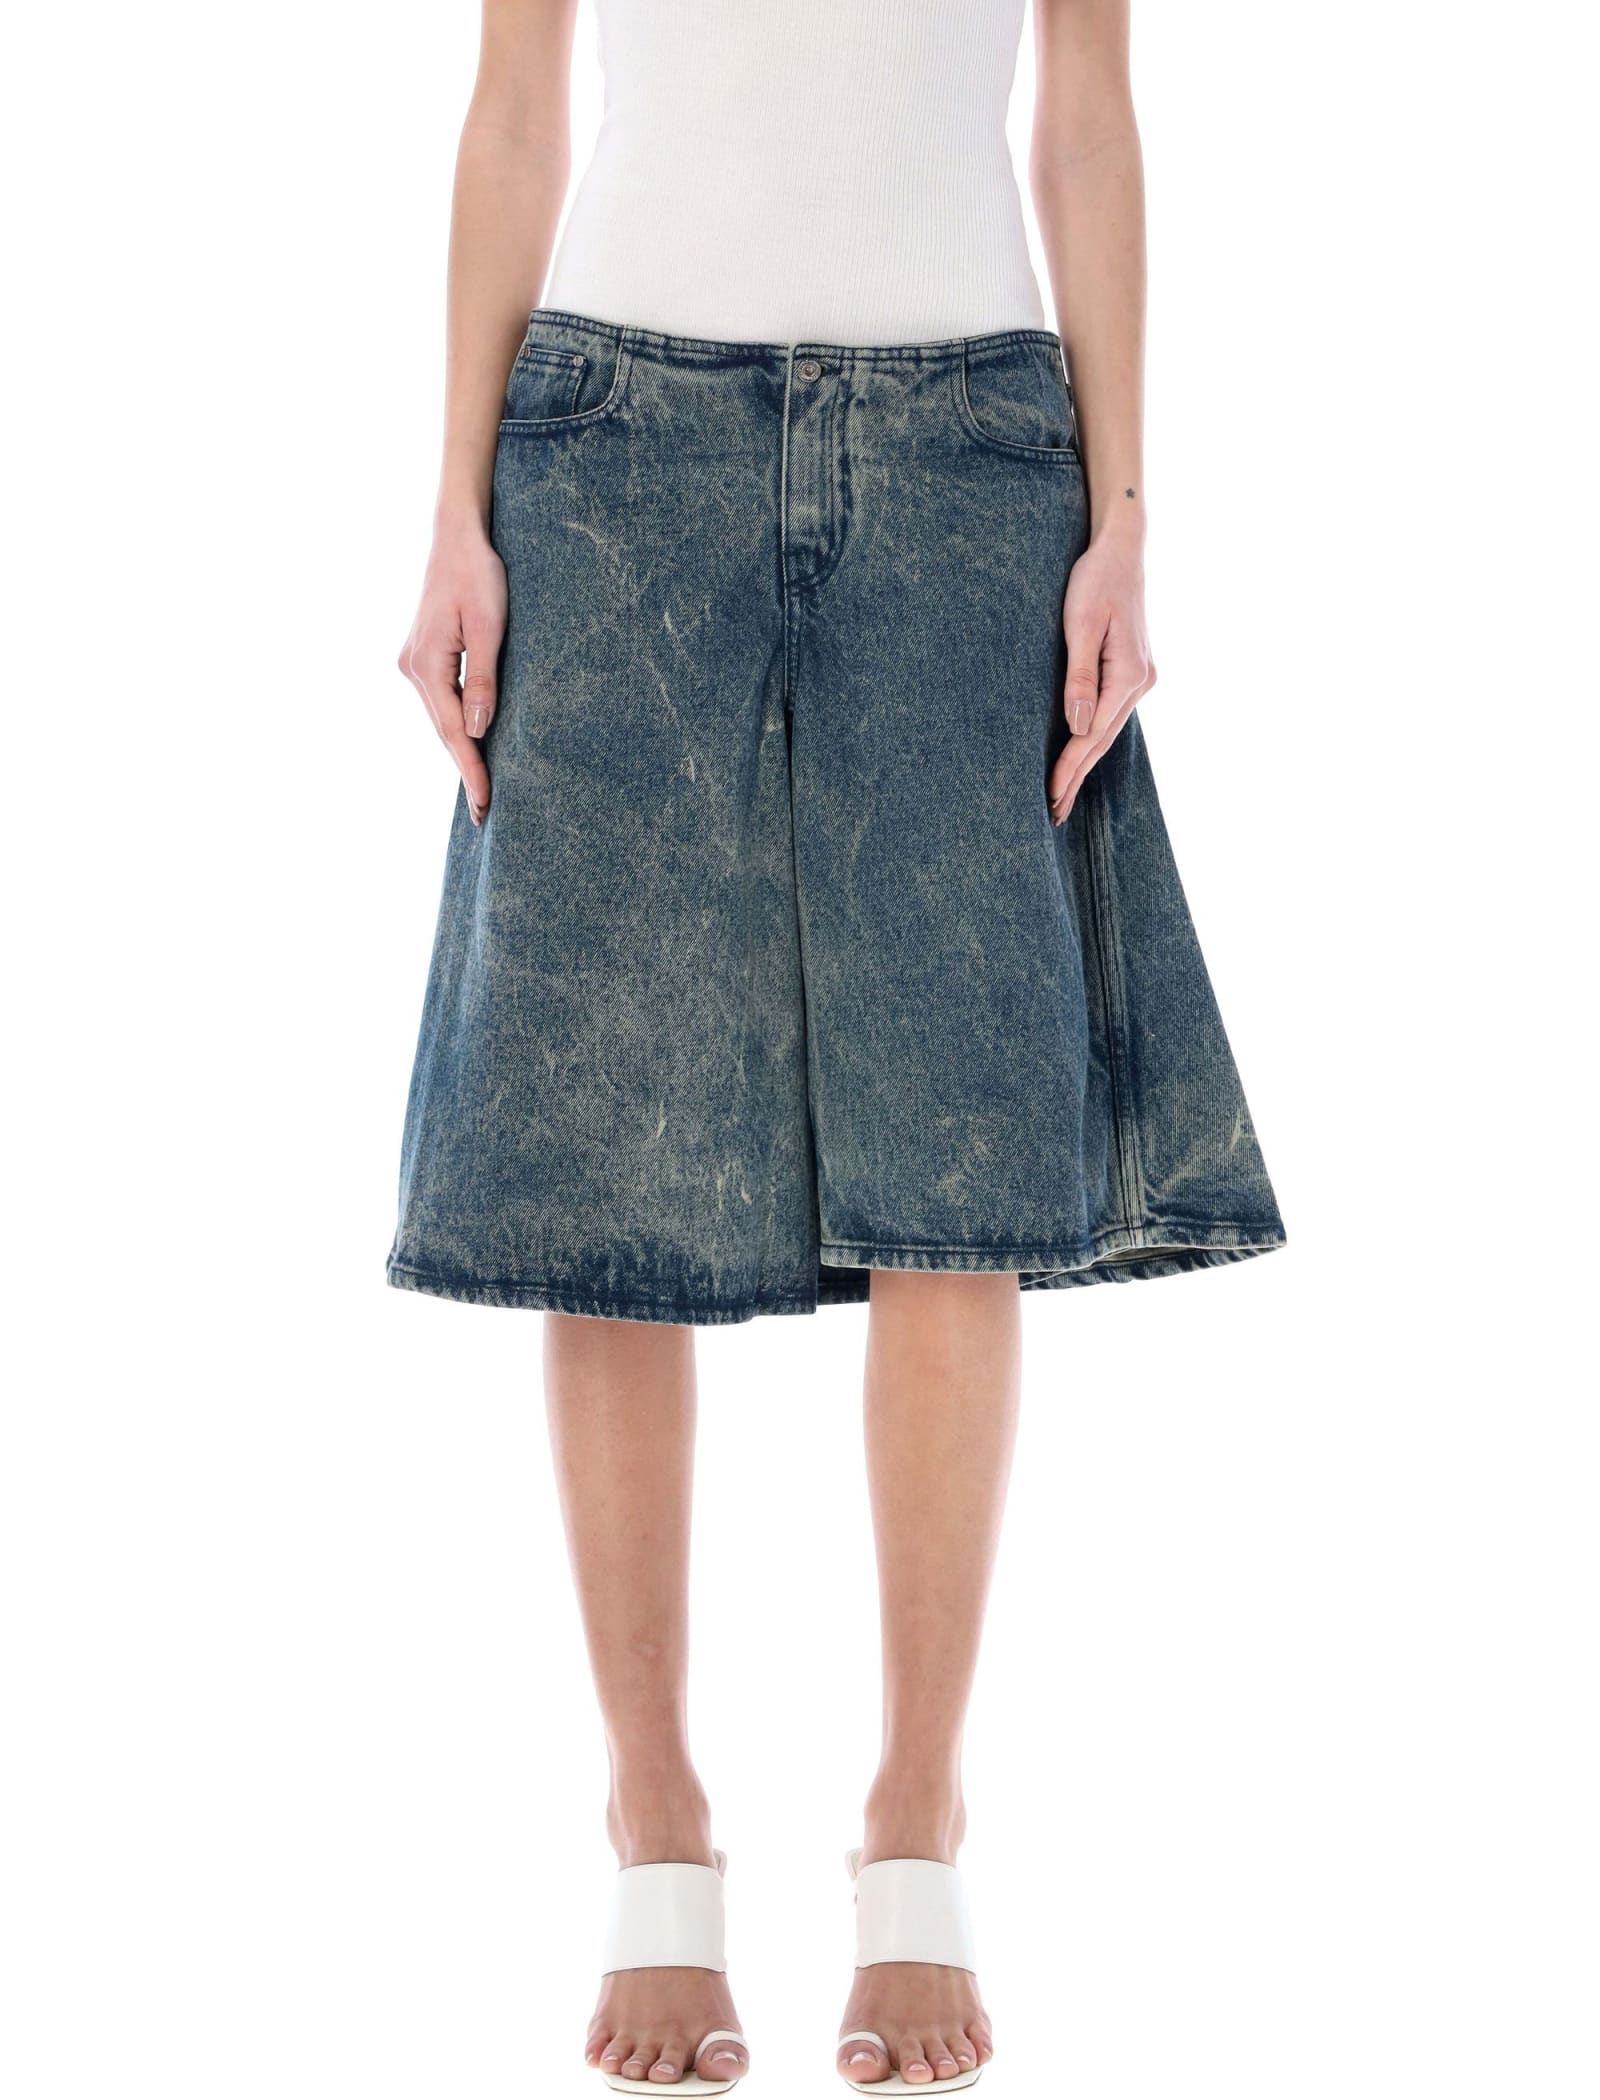 Y/PROJECT DENIM SKIRT WITH INNER SHORTS